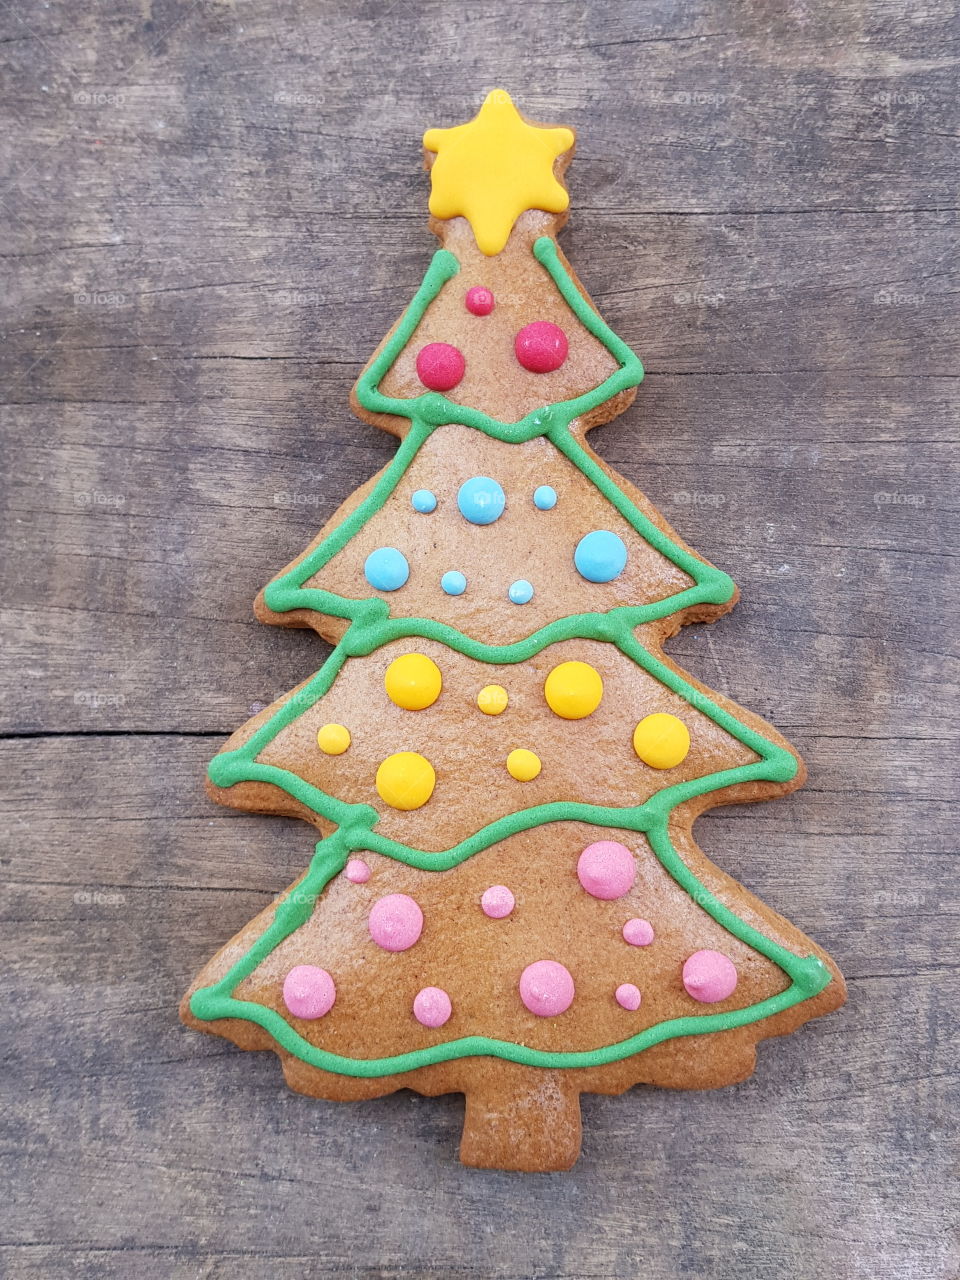 Gingerbread Christmas tree on a wooden board